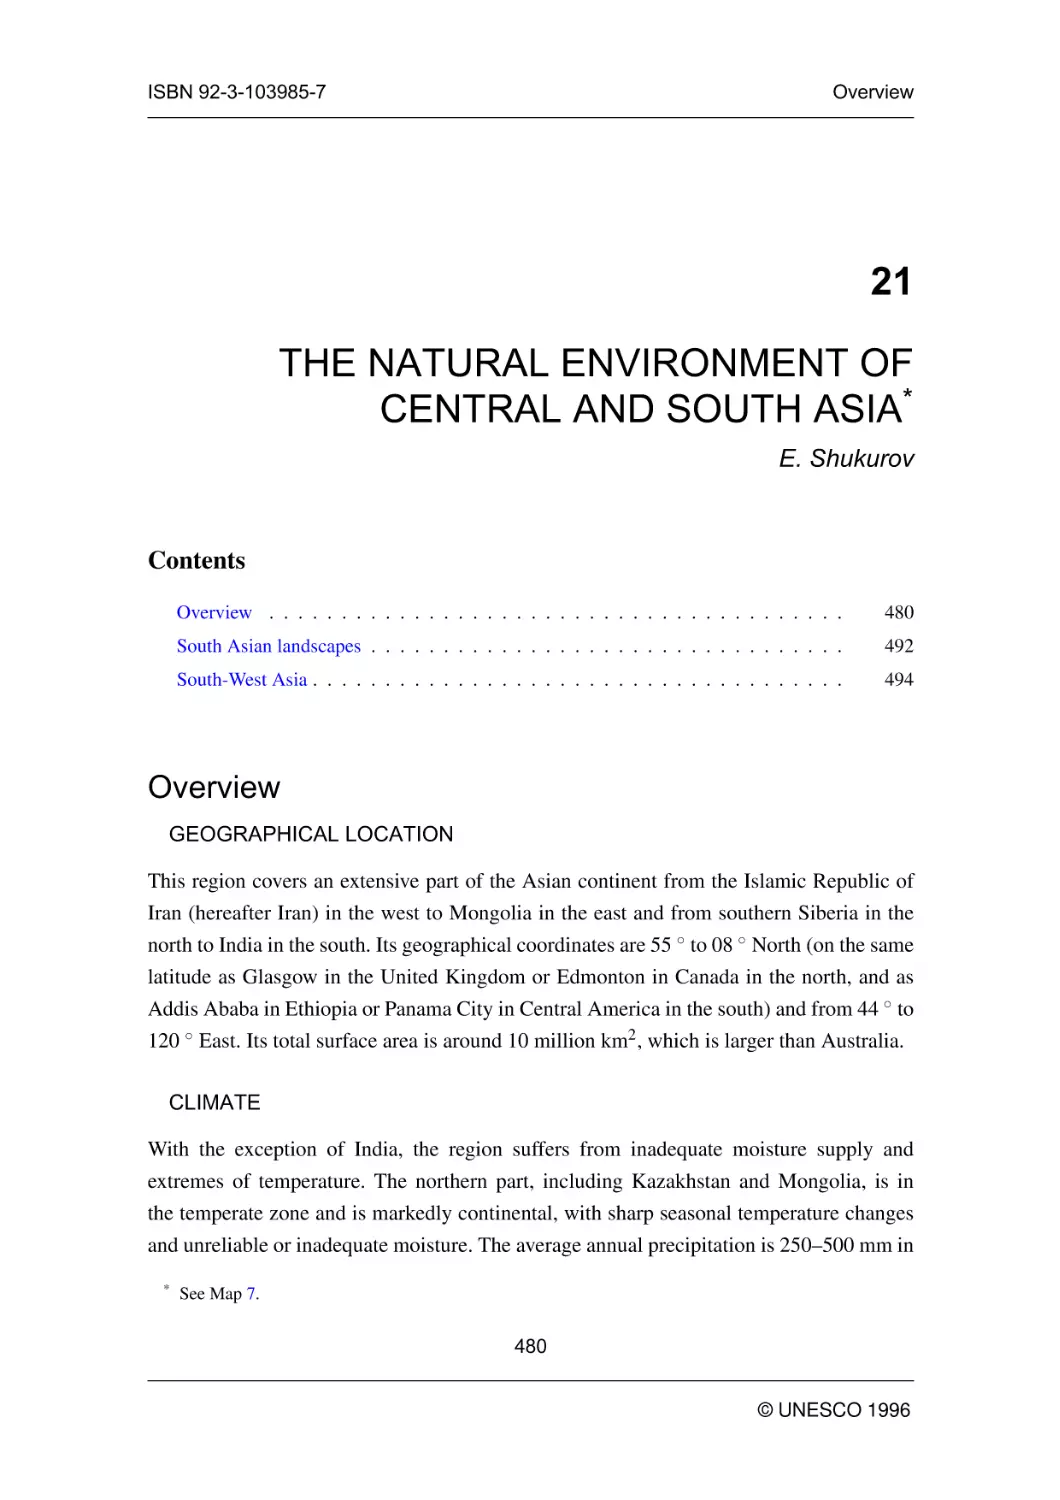 THE NATURAL ENVIRONMENT OF CENTRAL AND SOUTH ASIA